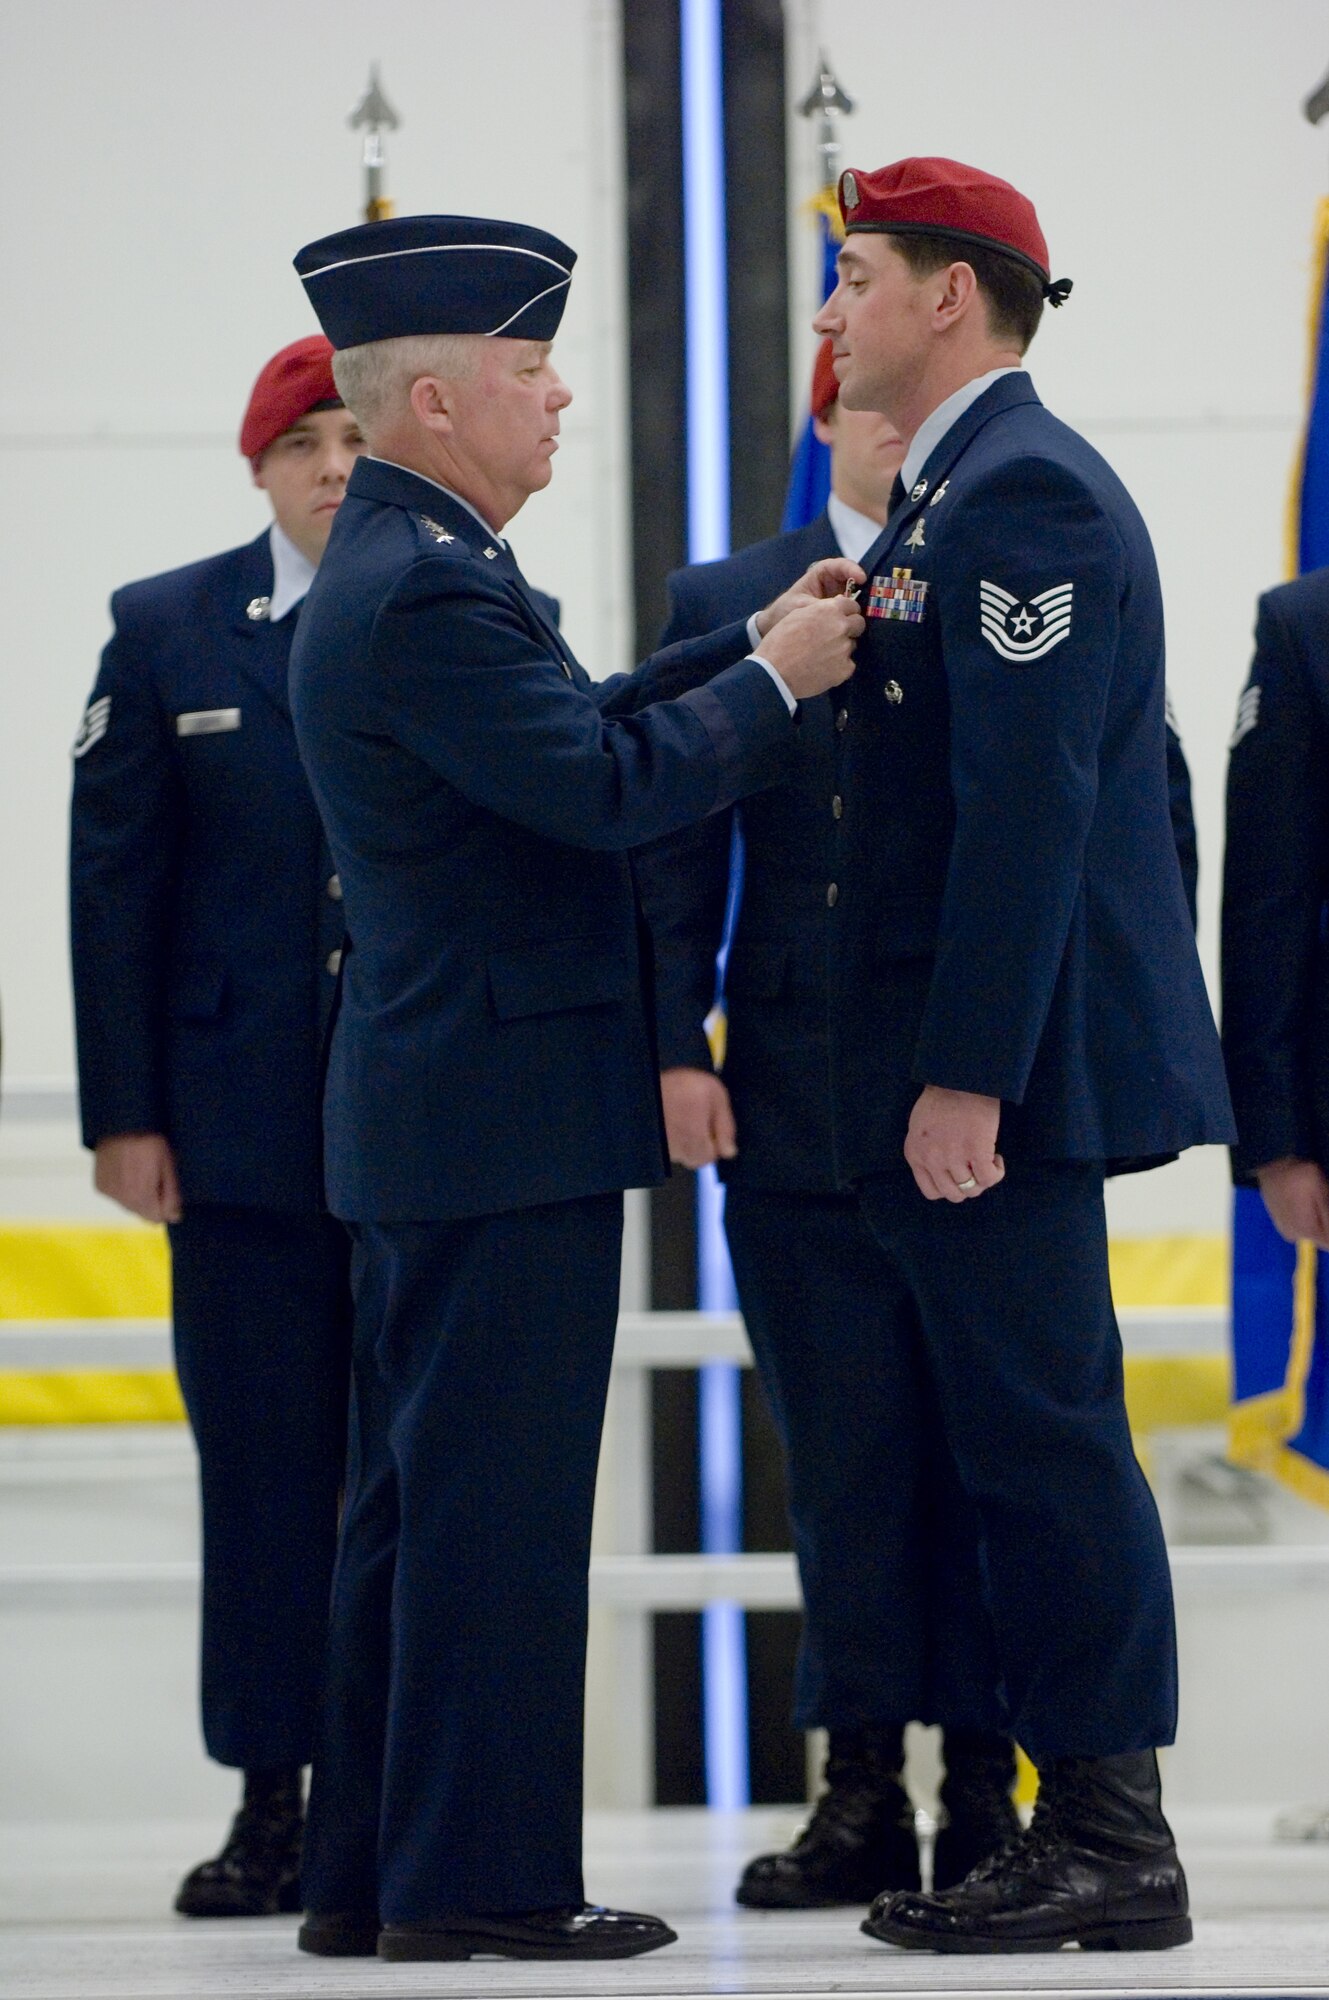 Lt. Gen. Donny Wurster (left), Air Force Special Operations Command commander, presents a Bronze Star with valor to Tech. Sgt. Jason Dryer (right), 22nd Special Tactics Squadron, during a medal ceremony at McChord Air Force Base, Wa., Dec. 18. Sergeant Dryer received the medal for his actions while serving as a joint terminal air controller during a summer 2007 firefight with Taliban forces in Afghanistan. The combat controller also received a Purple Heart and Air Force Combat Action Medal during the ceremony. (U.S. Air Force photo/Abner Guzman)